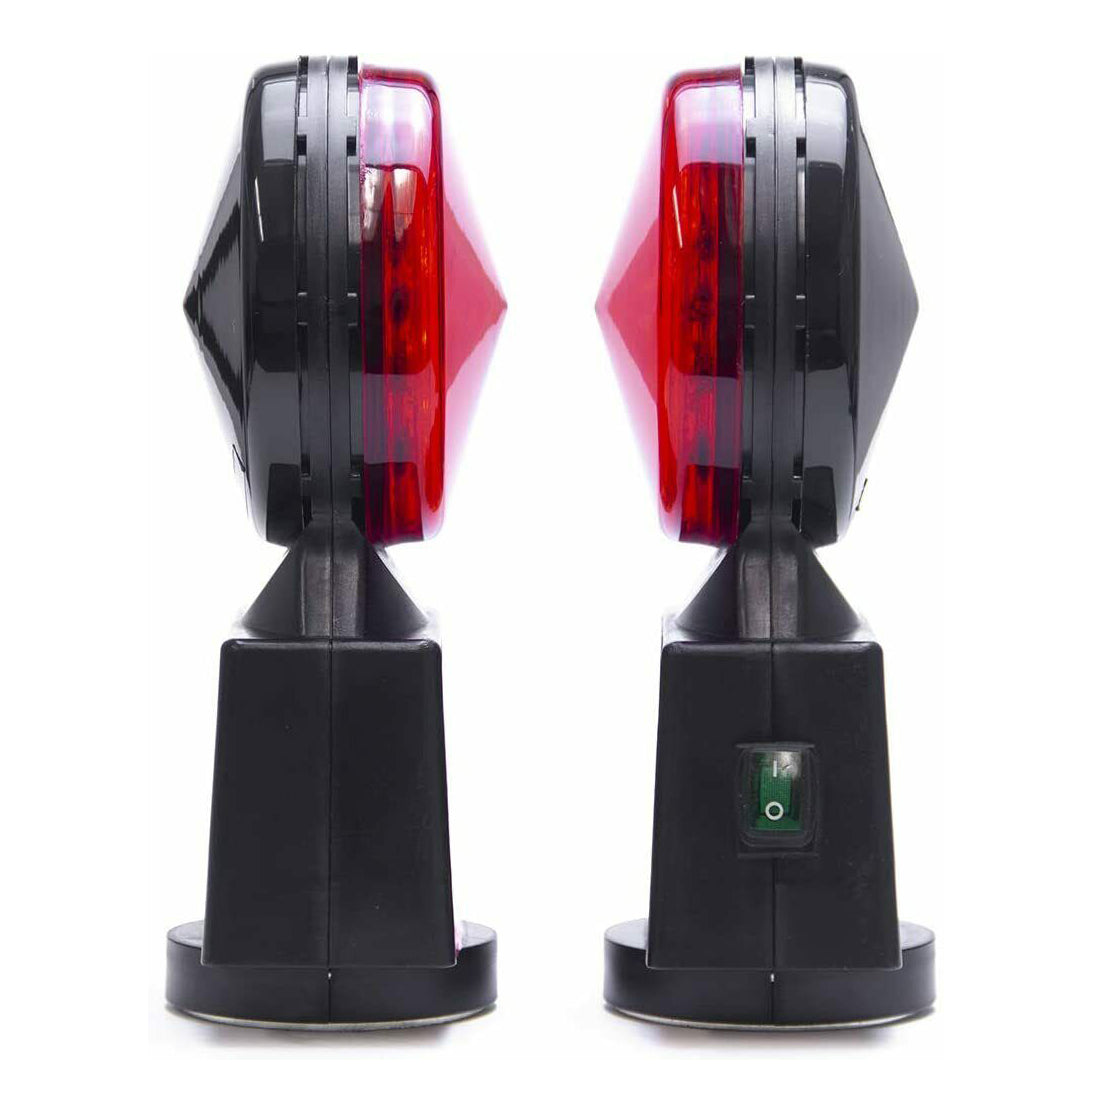 Wireless Trailer Tow Lights - Magnetic Mount - 65 Feet Range - 7 Pin Flat Connection